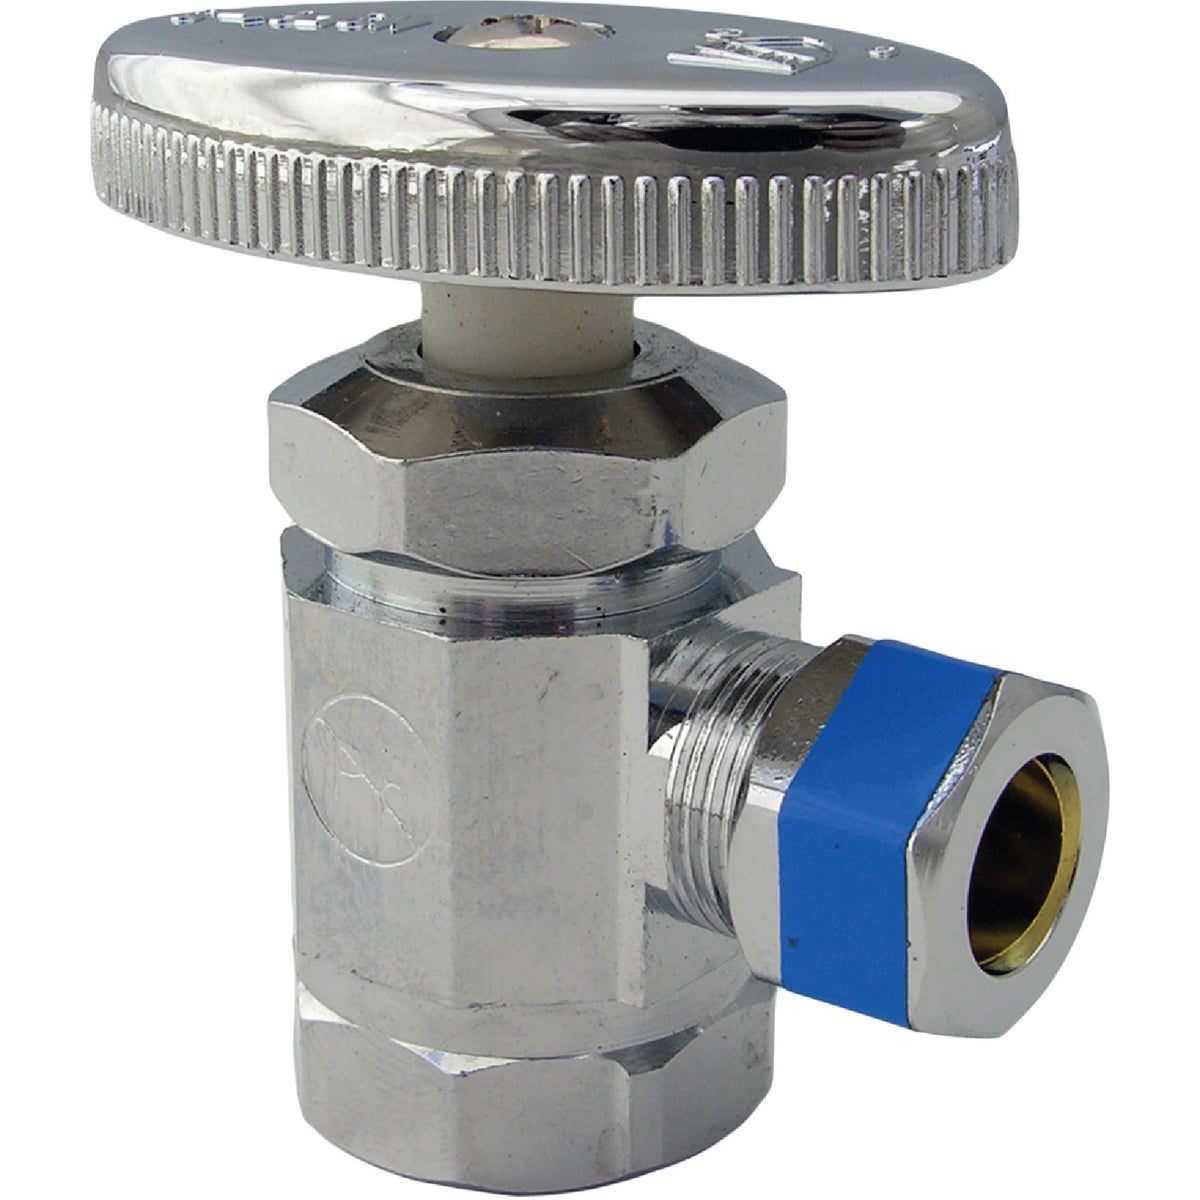 Lasco 1/2 In. FIP Inlet x 3/8 In. Compression Outlet Multi-Turn Style Angle Valve